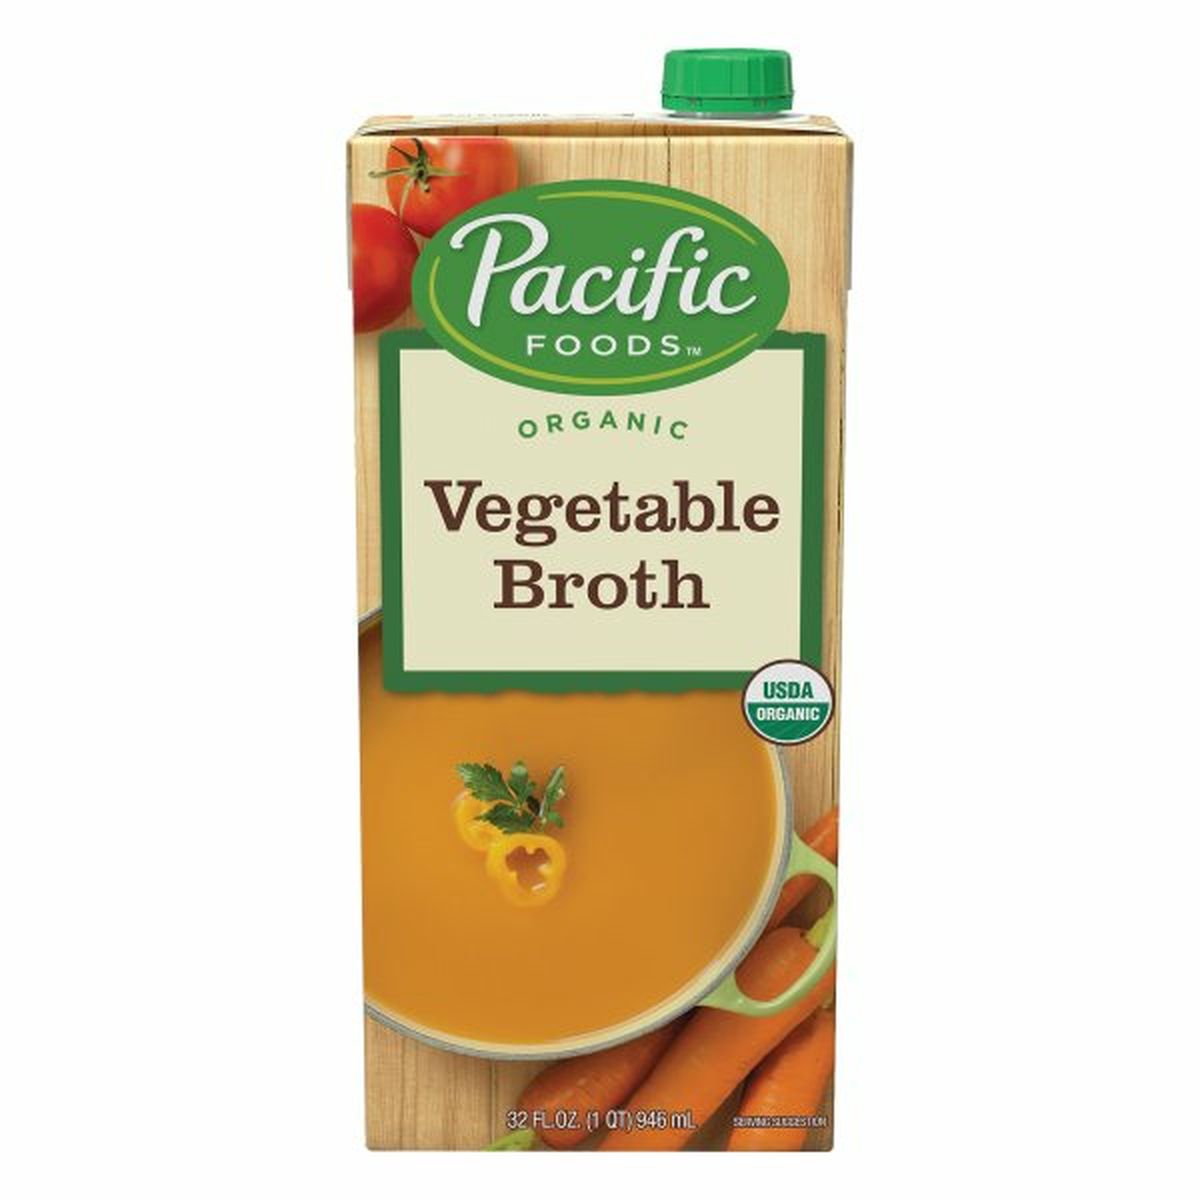 Calories in Pacific Vegetable Broth, Organic